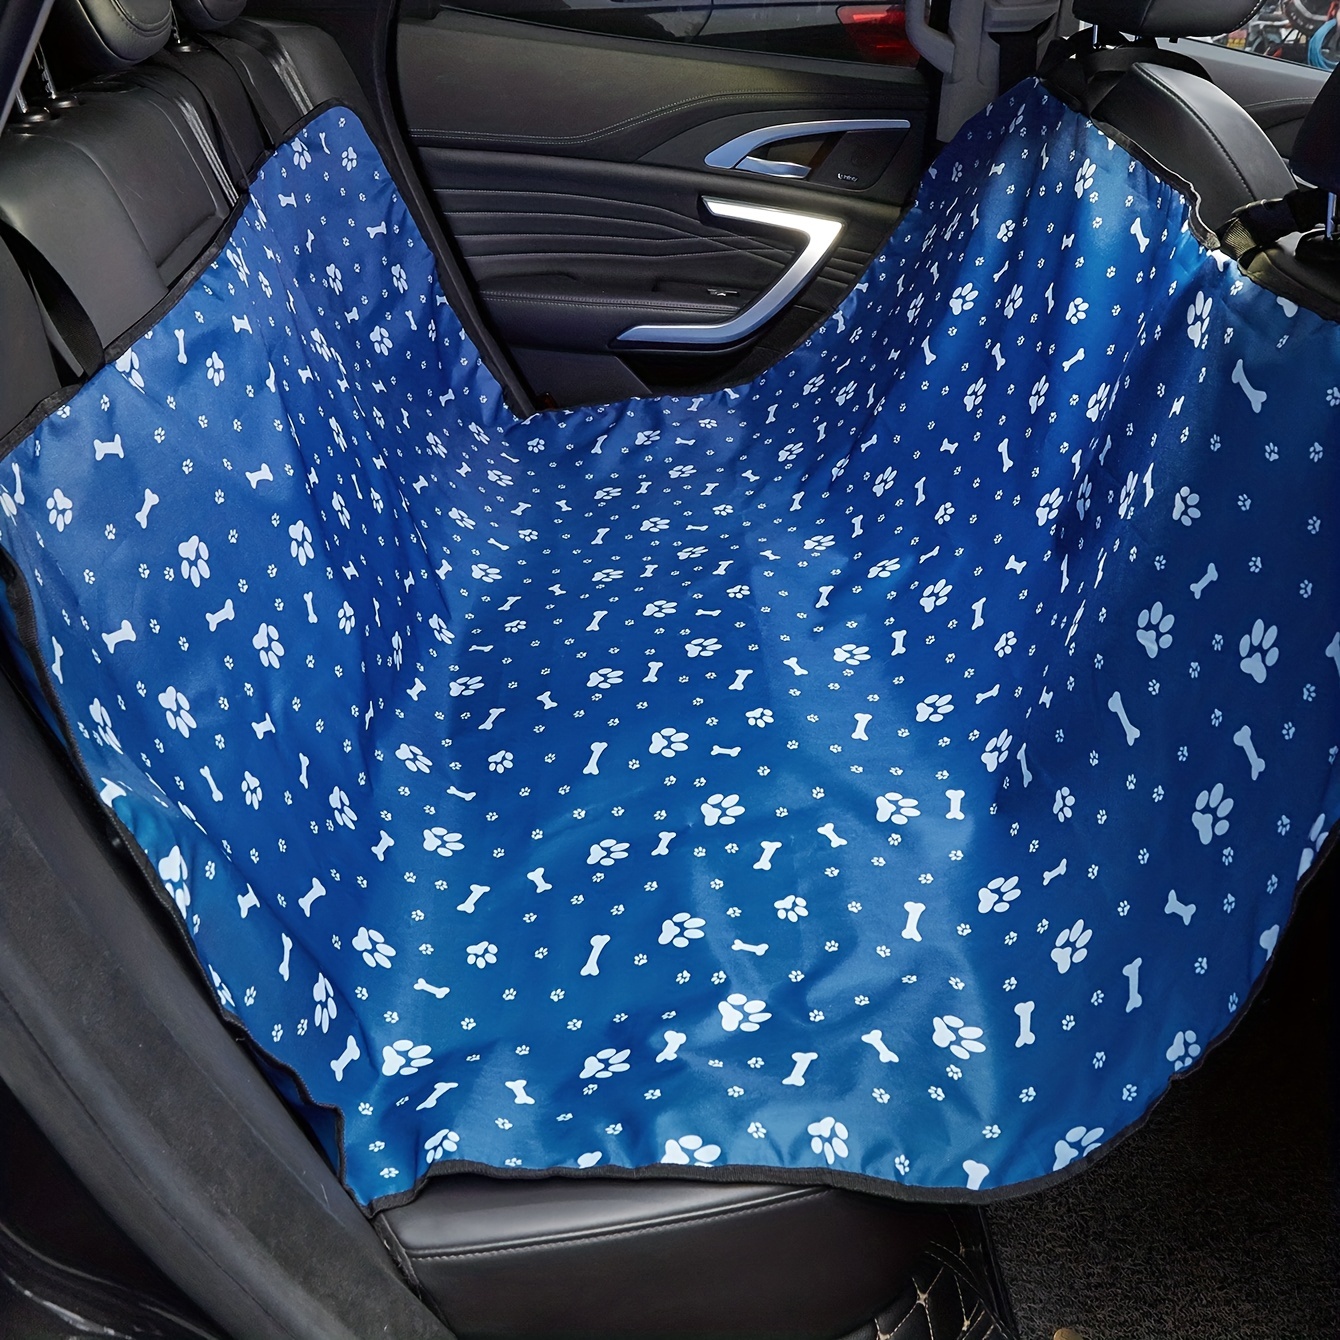 Waterproof Dog Car Seat Cover For Suvs, Trucks & Cars - Sturdy Oxford Pet  Bench Protector With